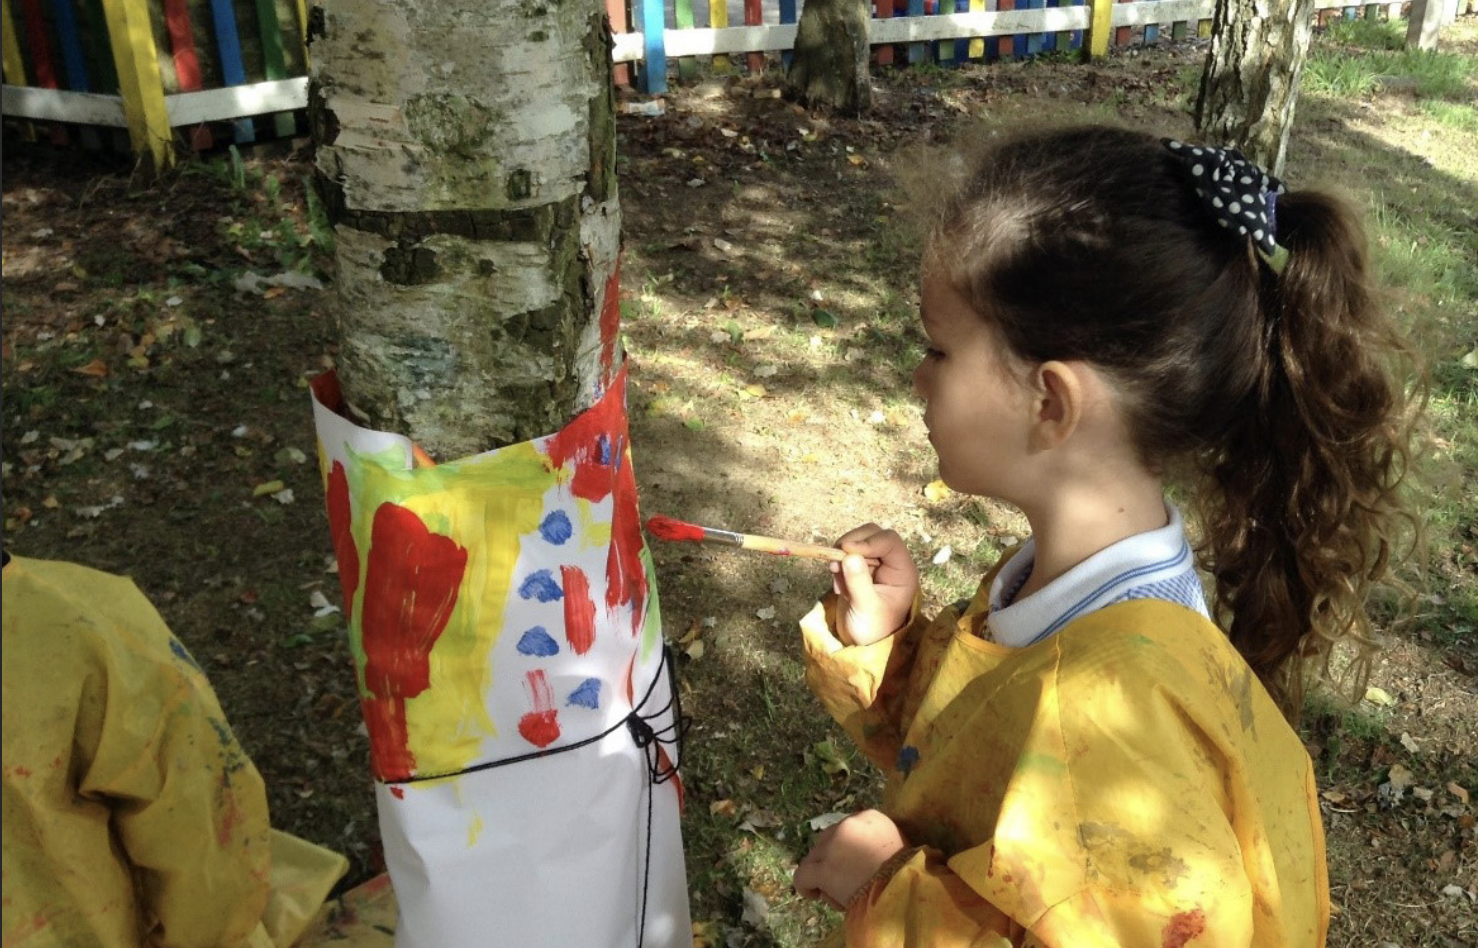 A young girl is seen wearing an art apron and painting on a sheet of paper which is tied to a tree trunk outdoors.